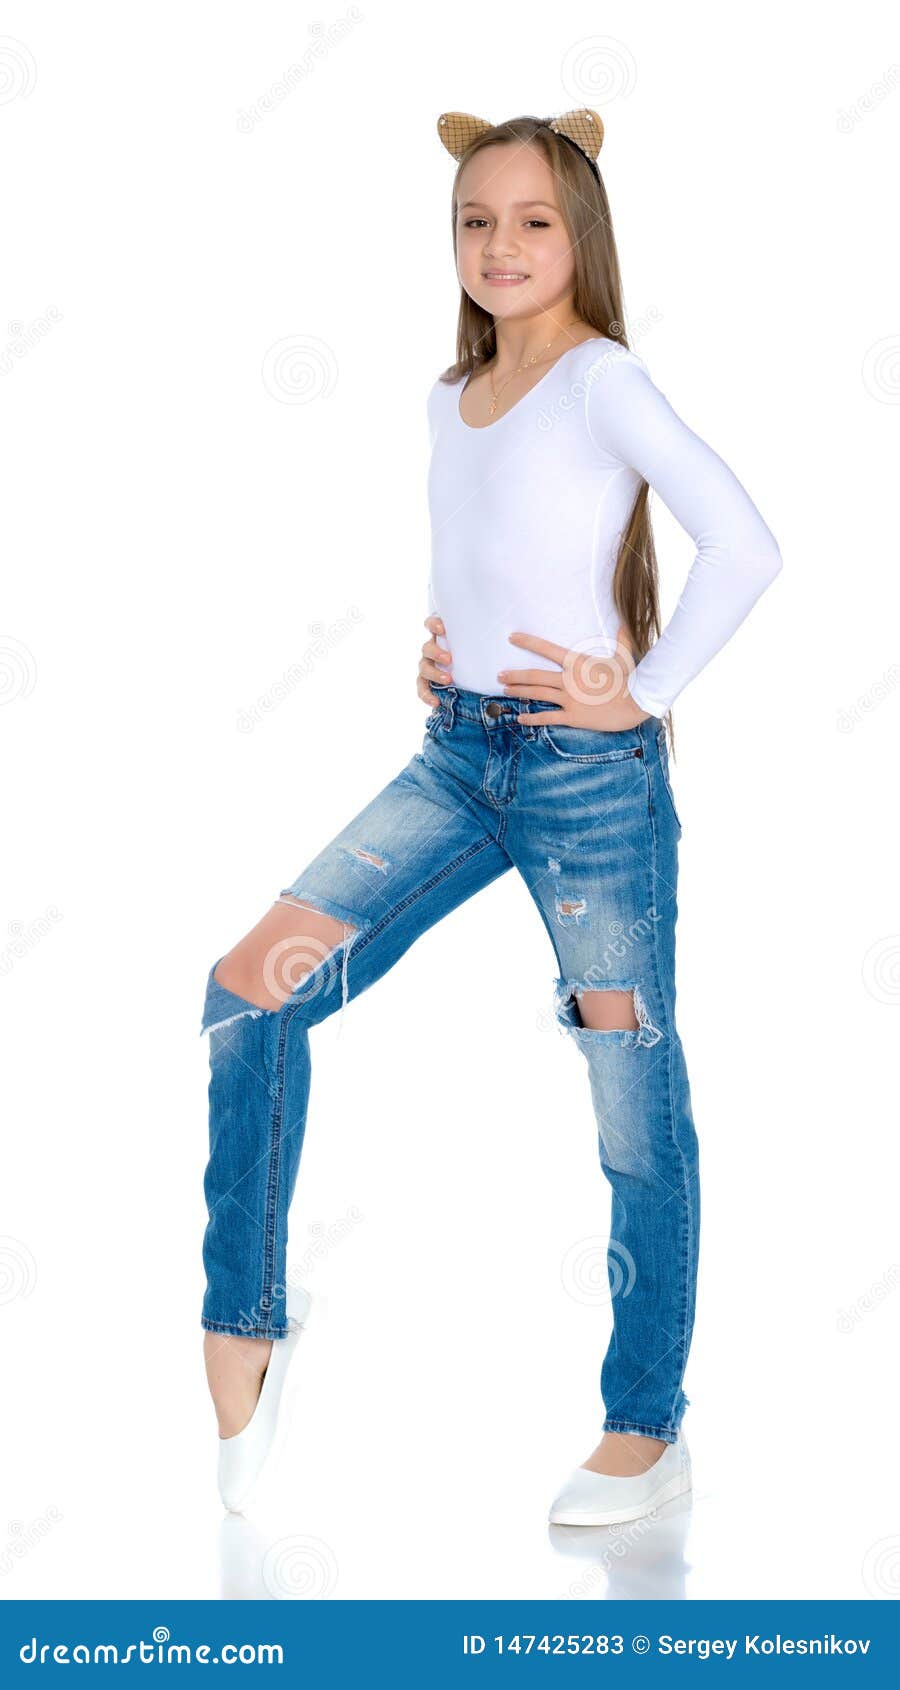 Teens In Jeans Pics